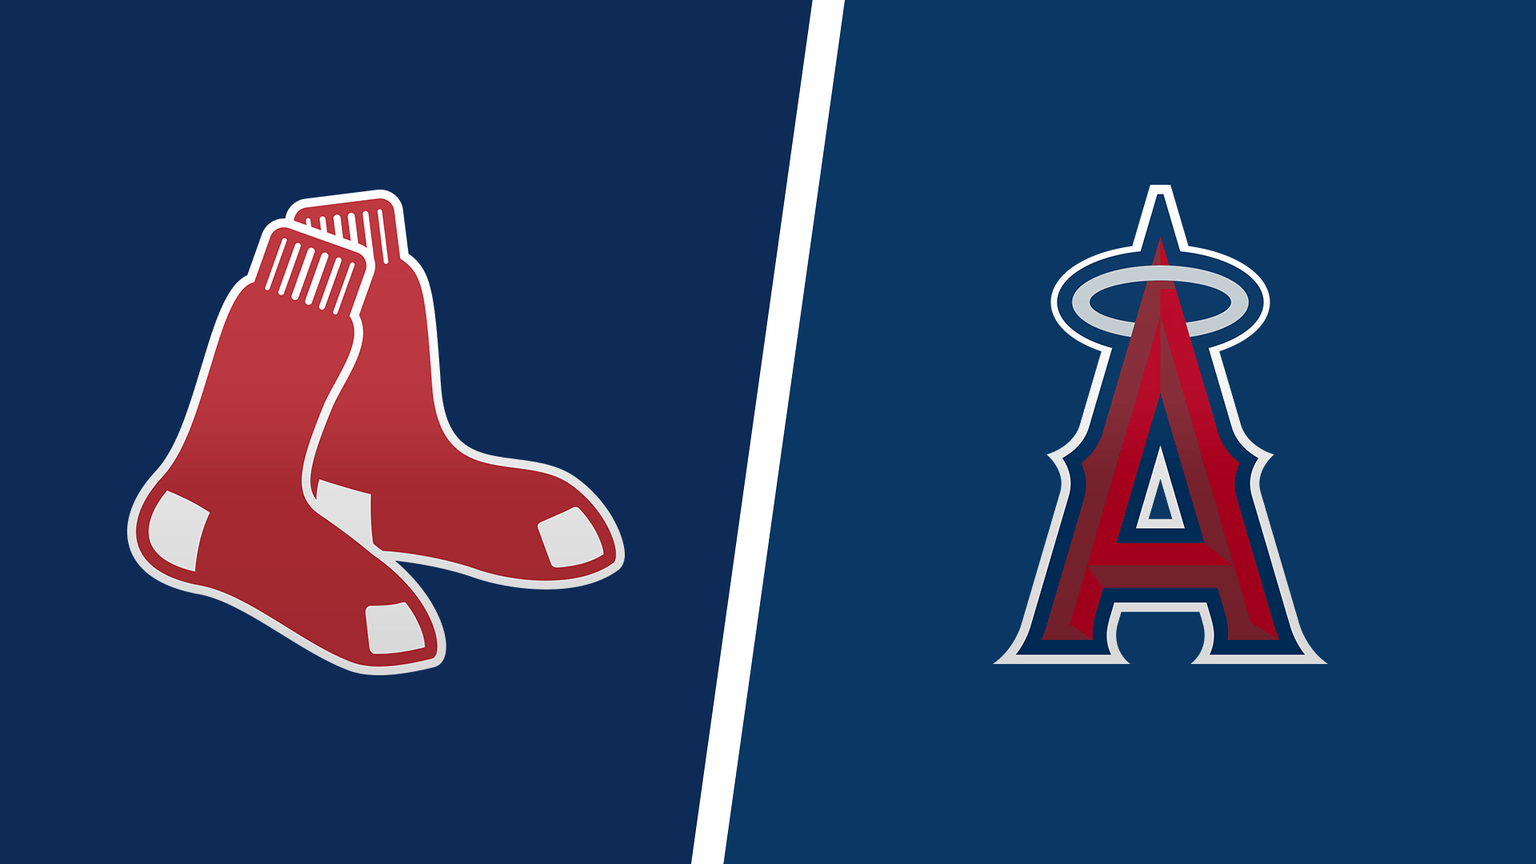 How to Watch Angels vs. Red Sox Live Stream Online on May 16, 2021 TV